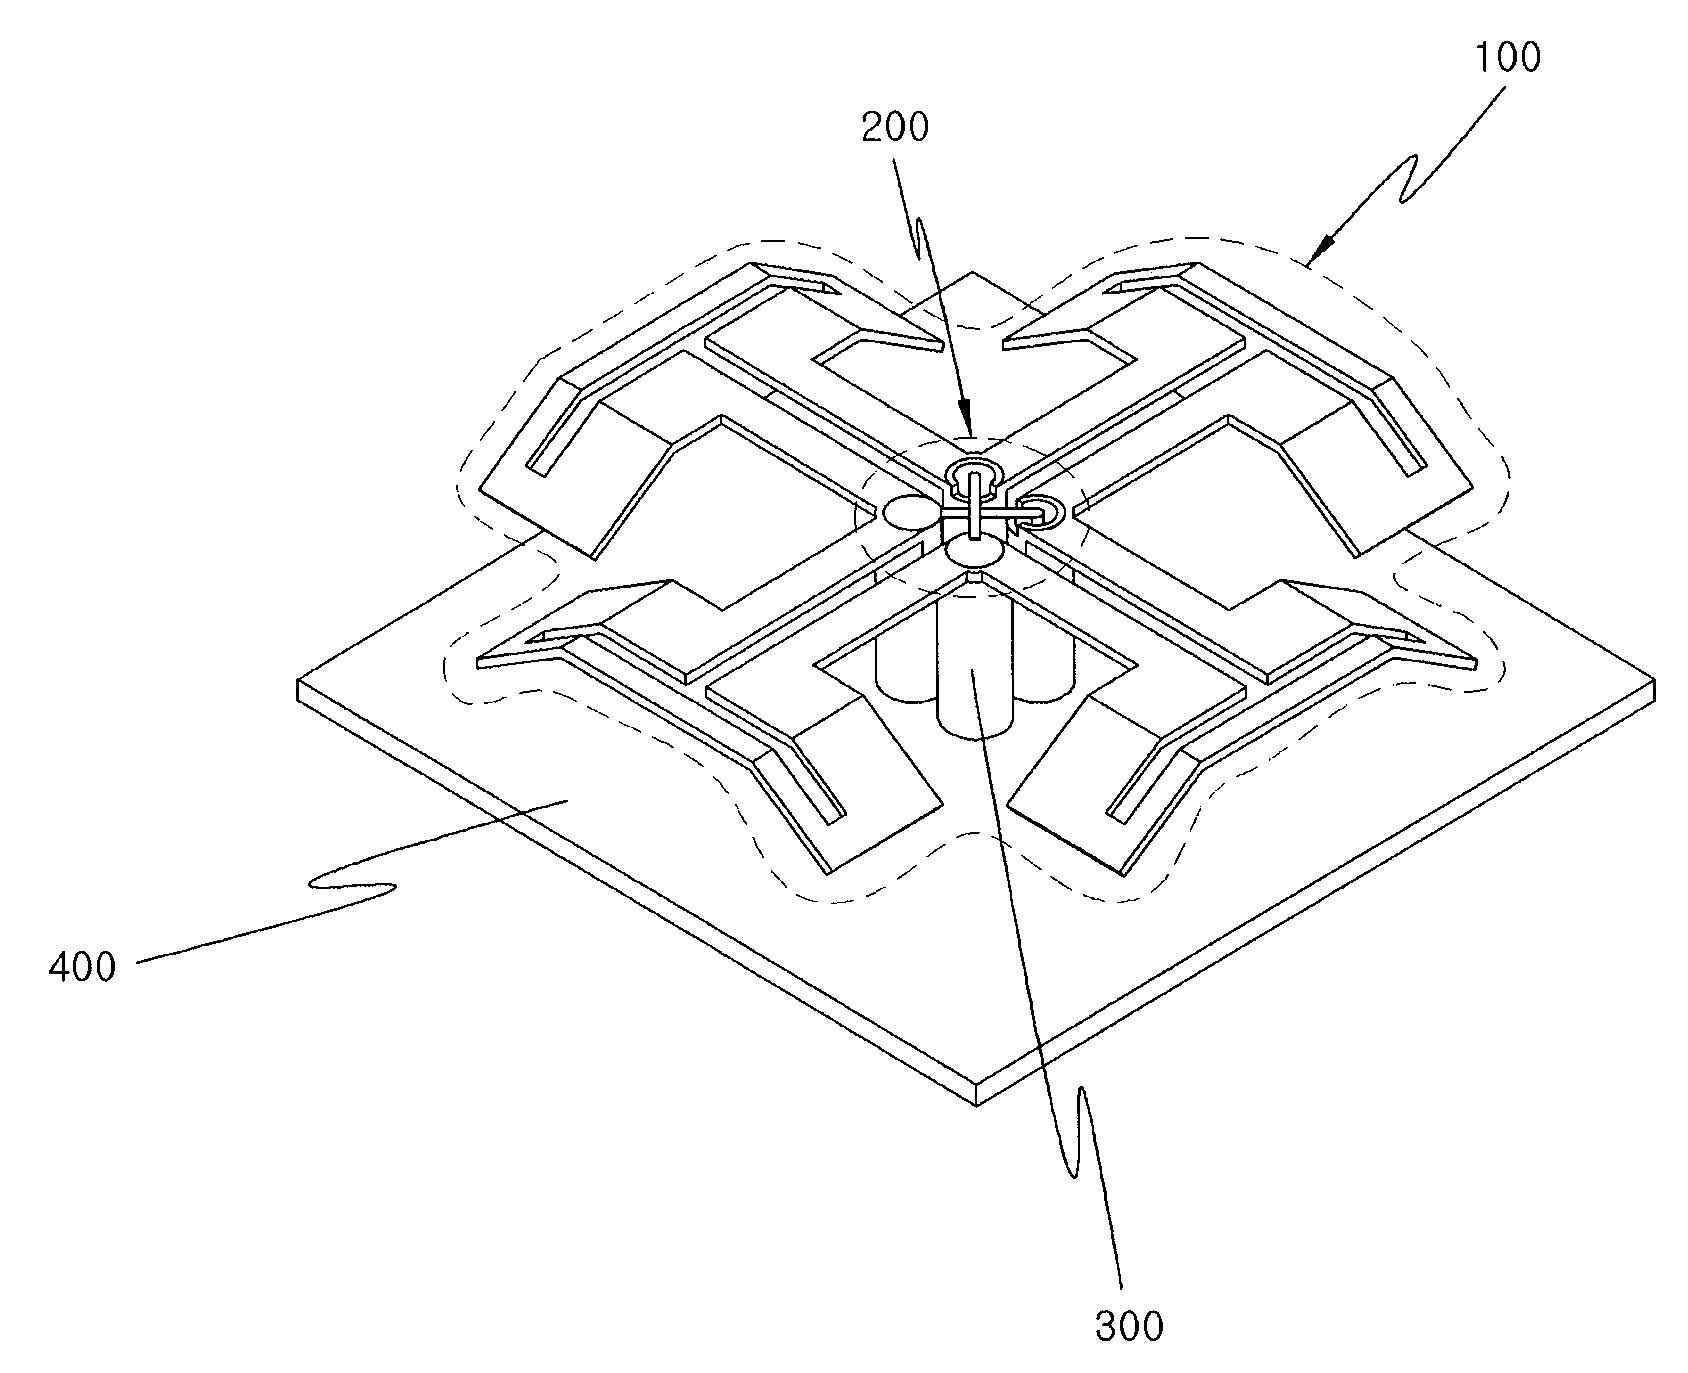 Bent folded dipole antenna for reducing beam width difference